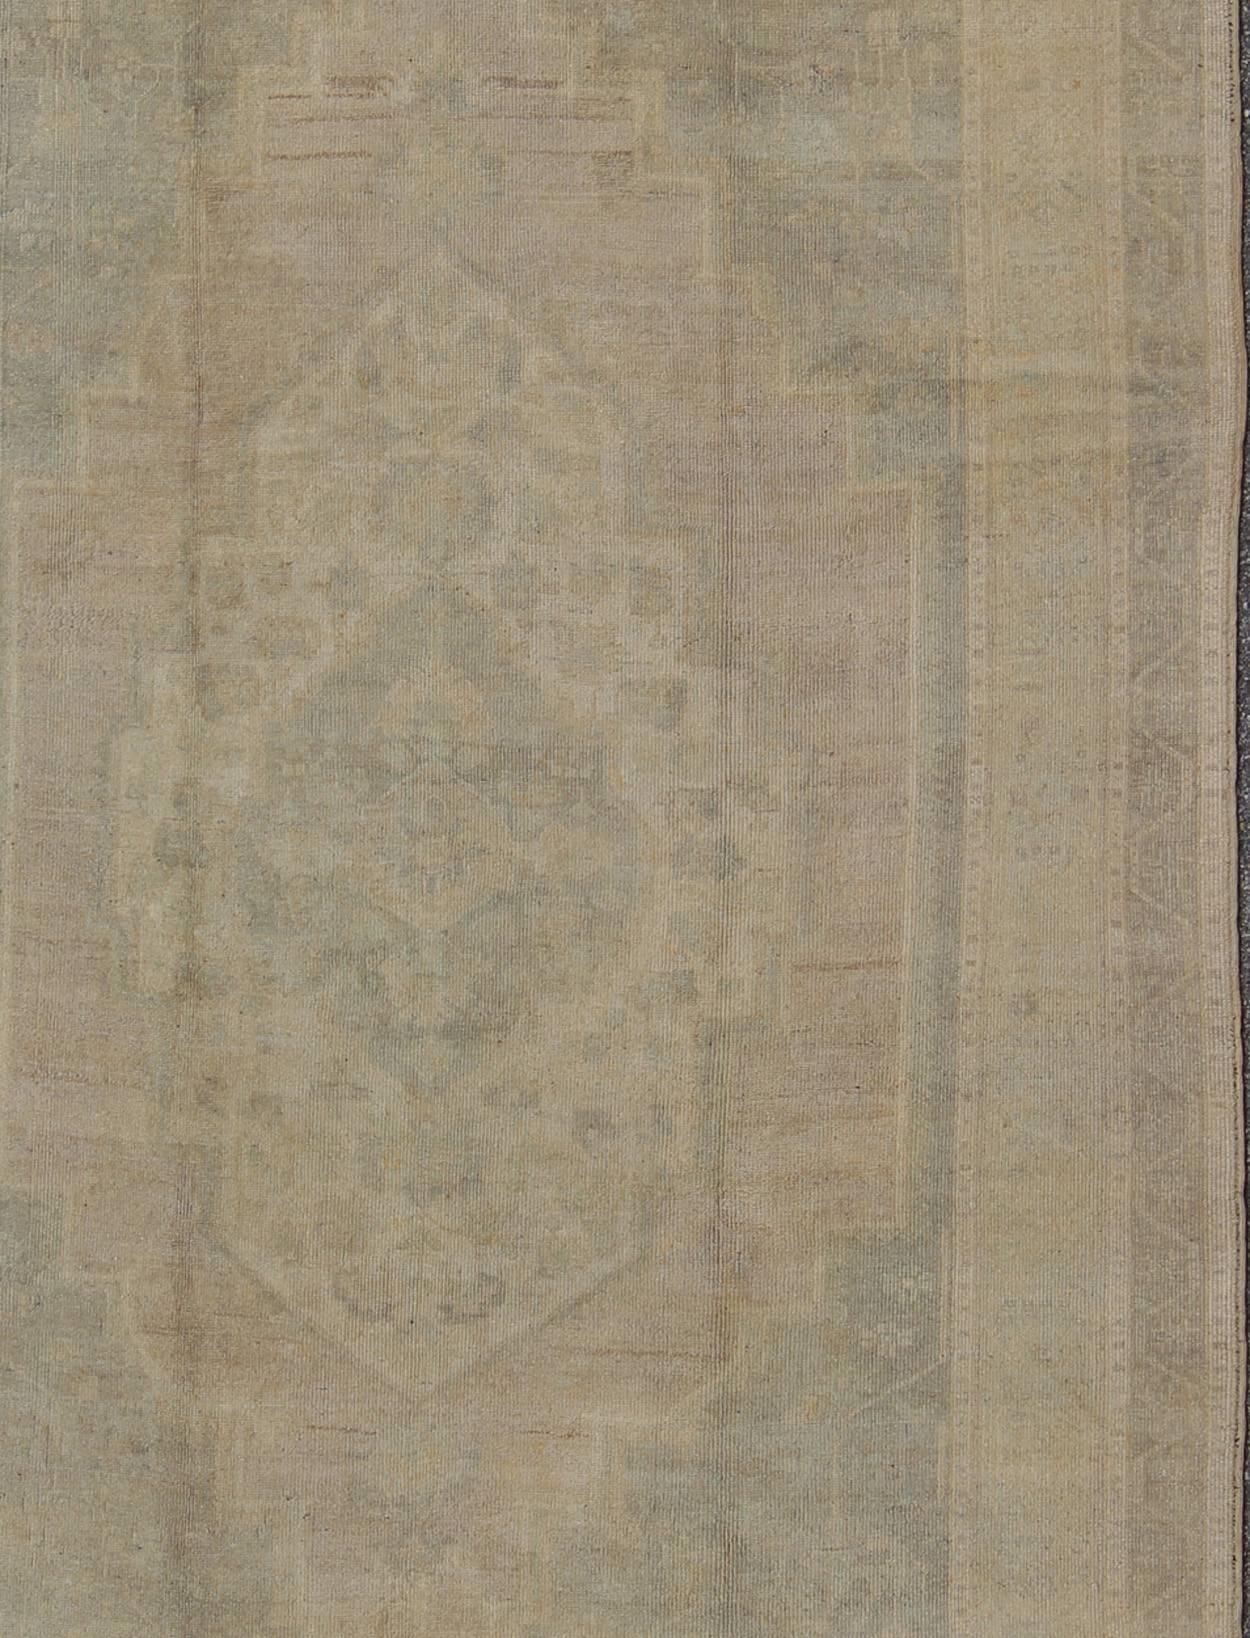 Vintage Turkish Oushak Rug with Neutral Colors, Taupe, Gray and Ivory In Good Condition For Sale In Atlanta, GA